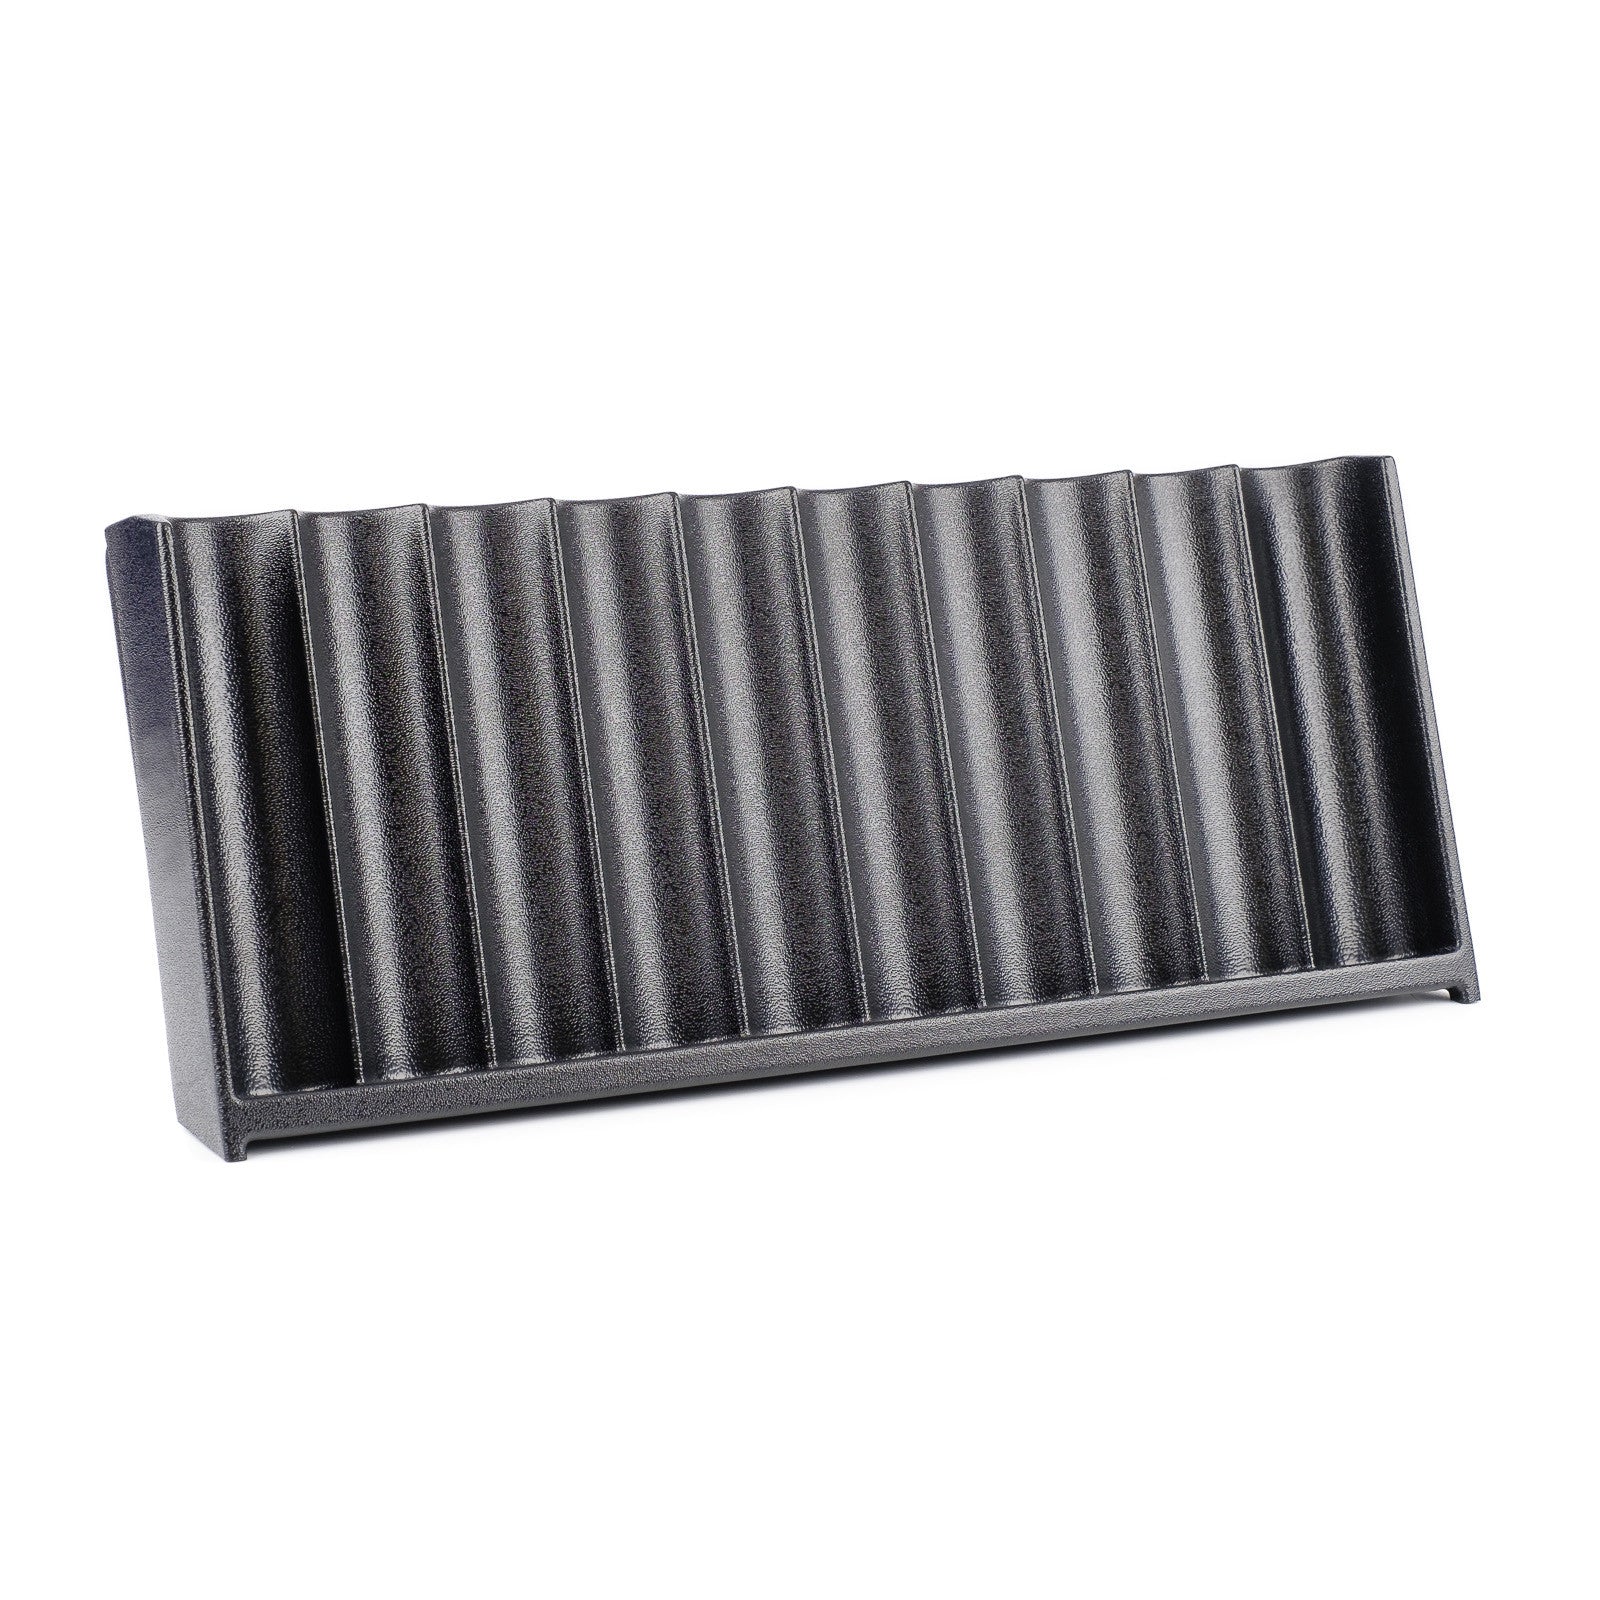 Vertical ABS Black Craps Chip Tray (10 Row / 500 Chip)